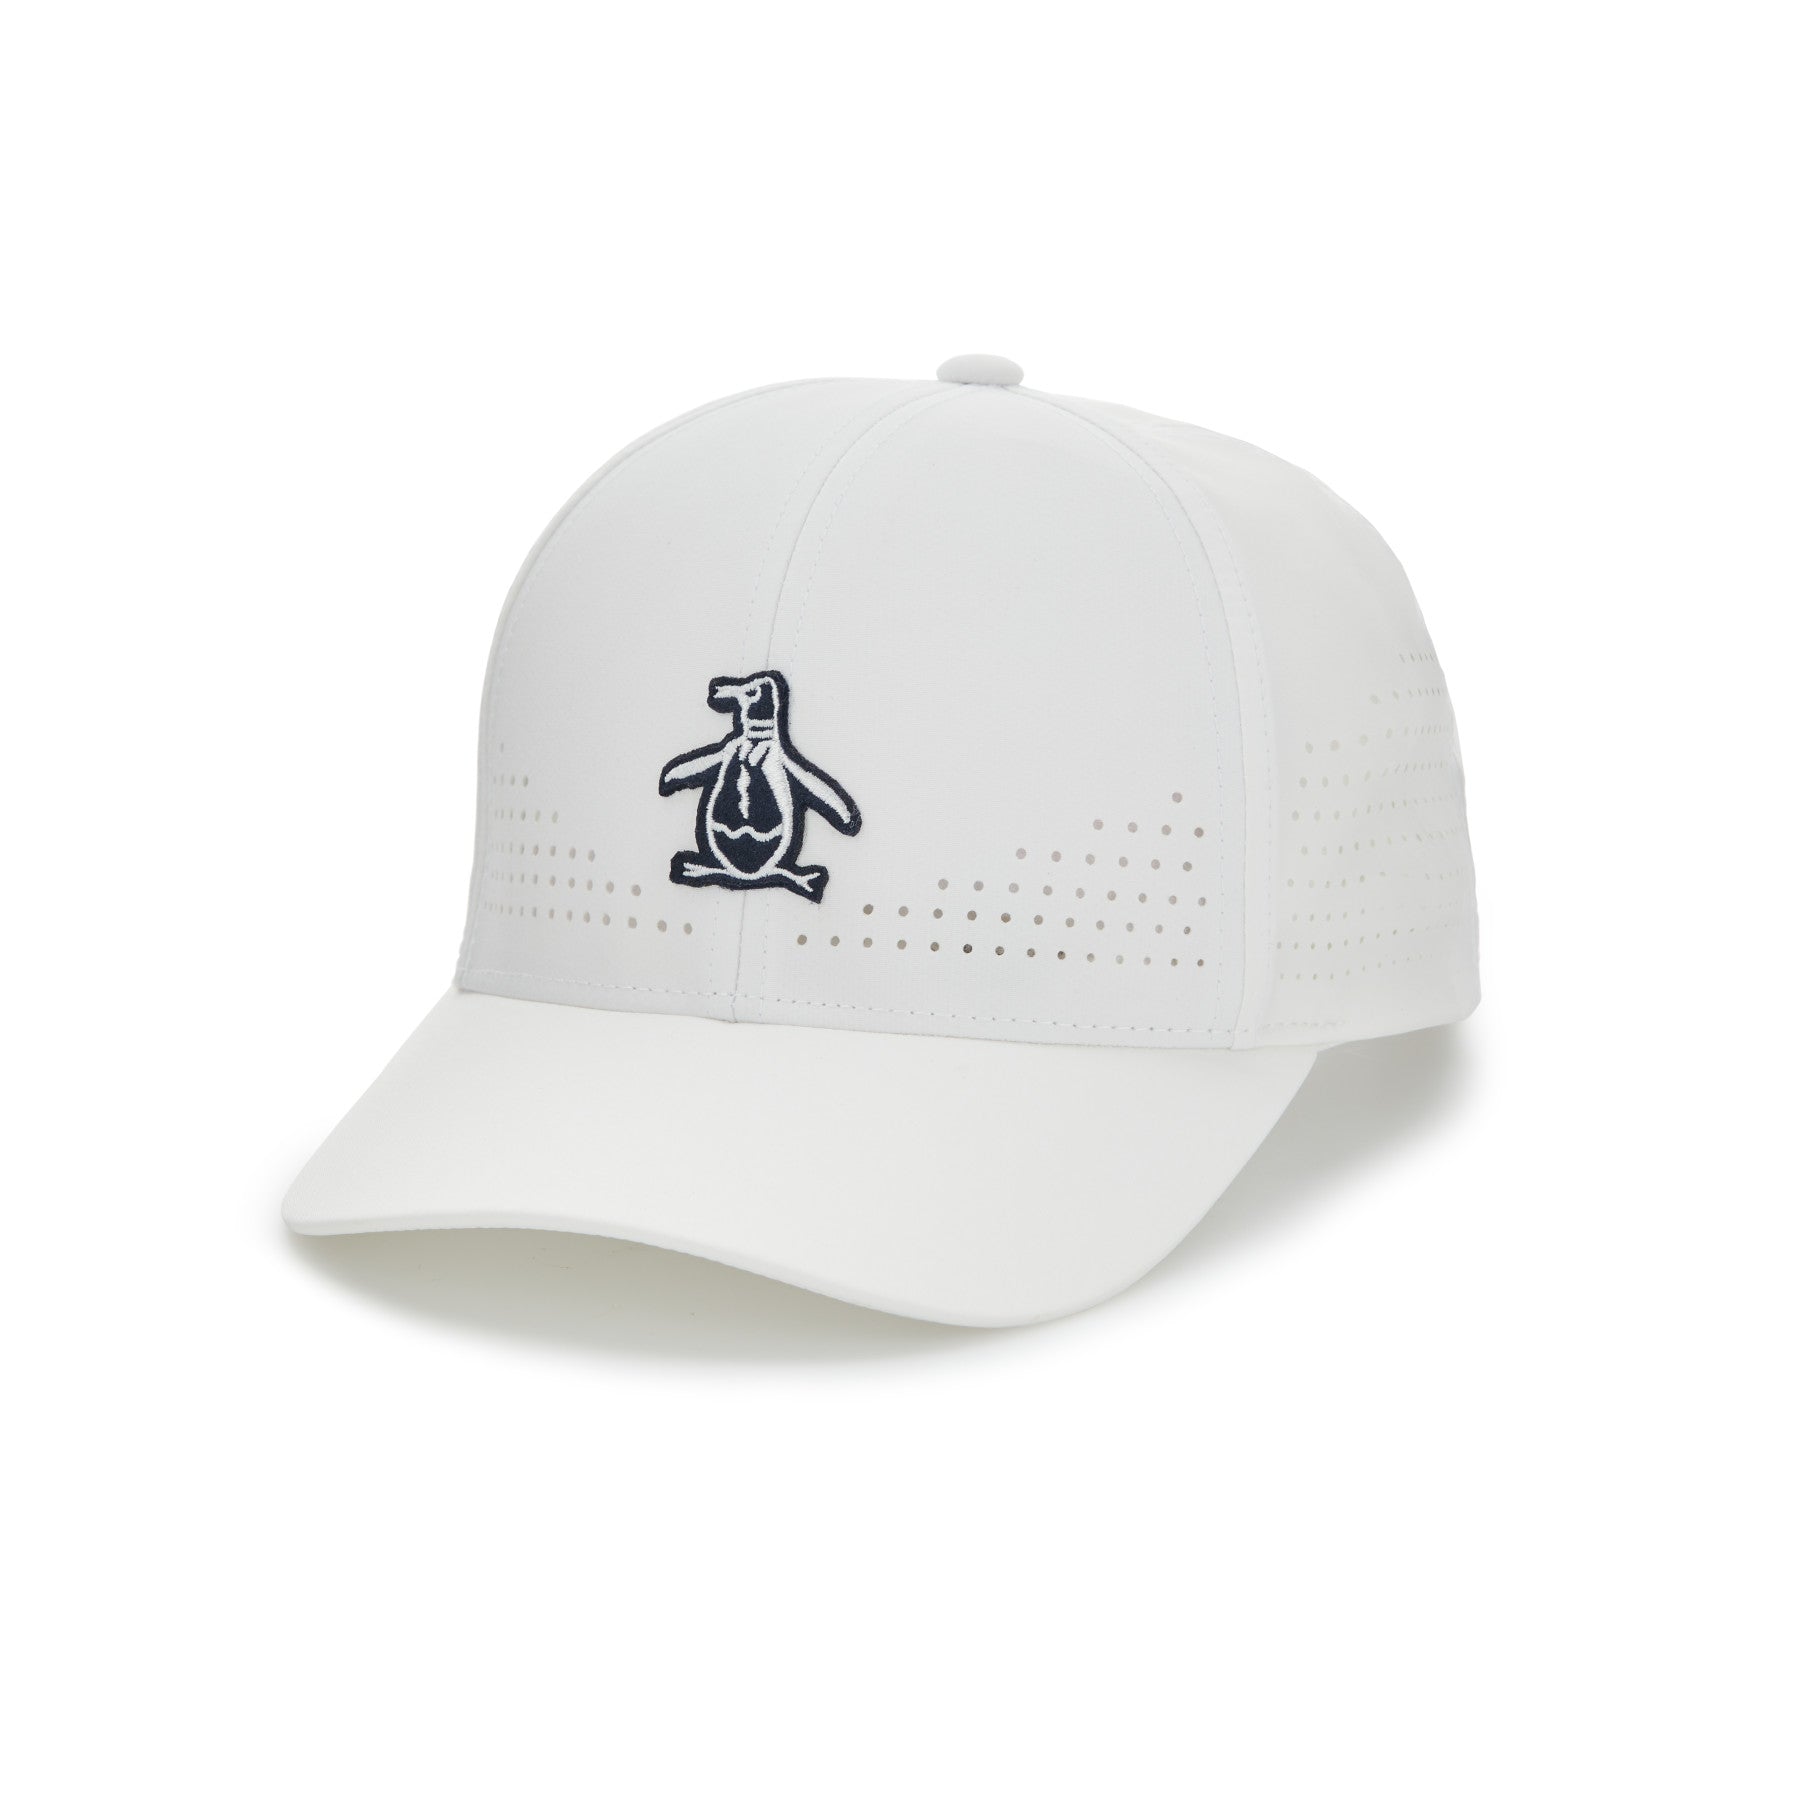 View Country Club Perforated Golf Cap In Bright White information